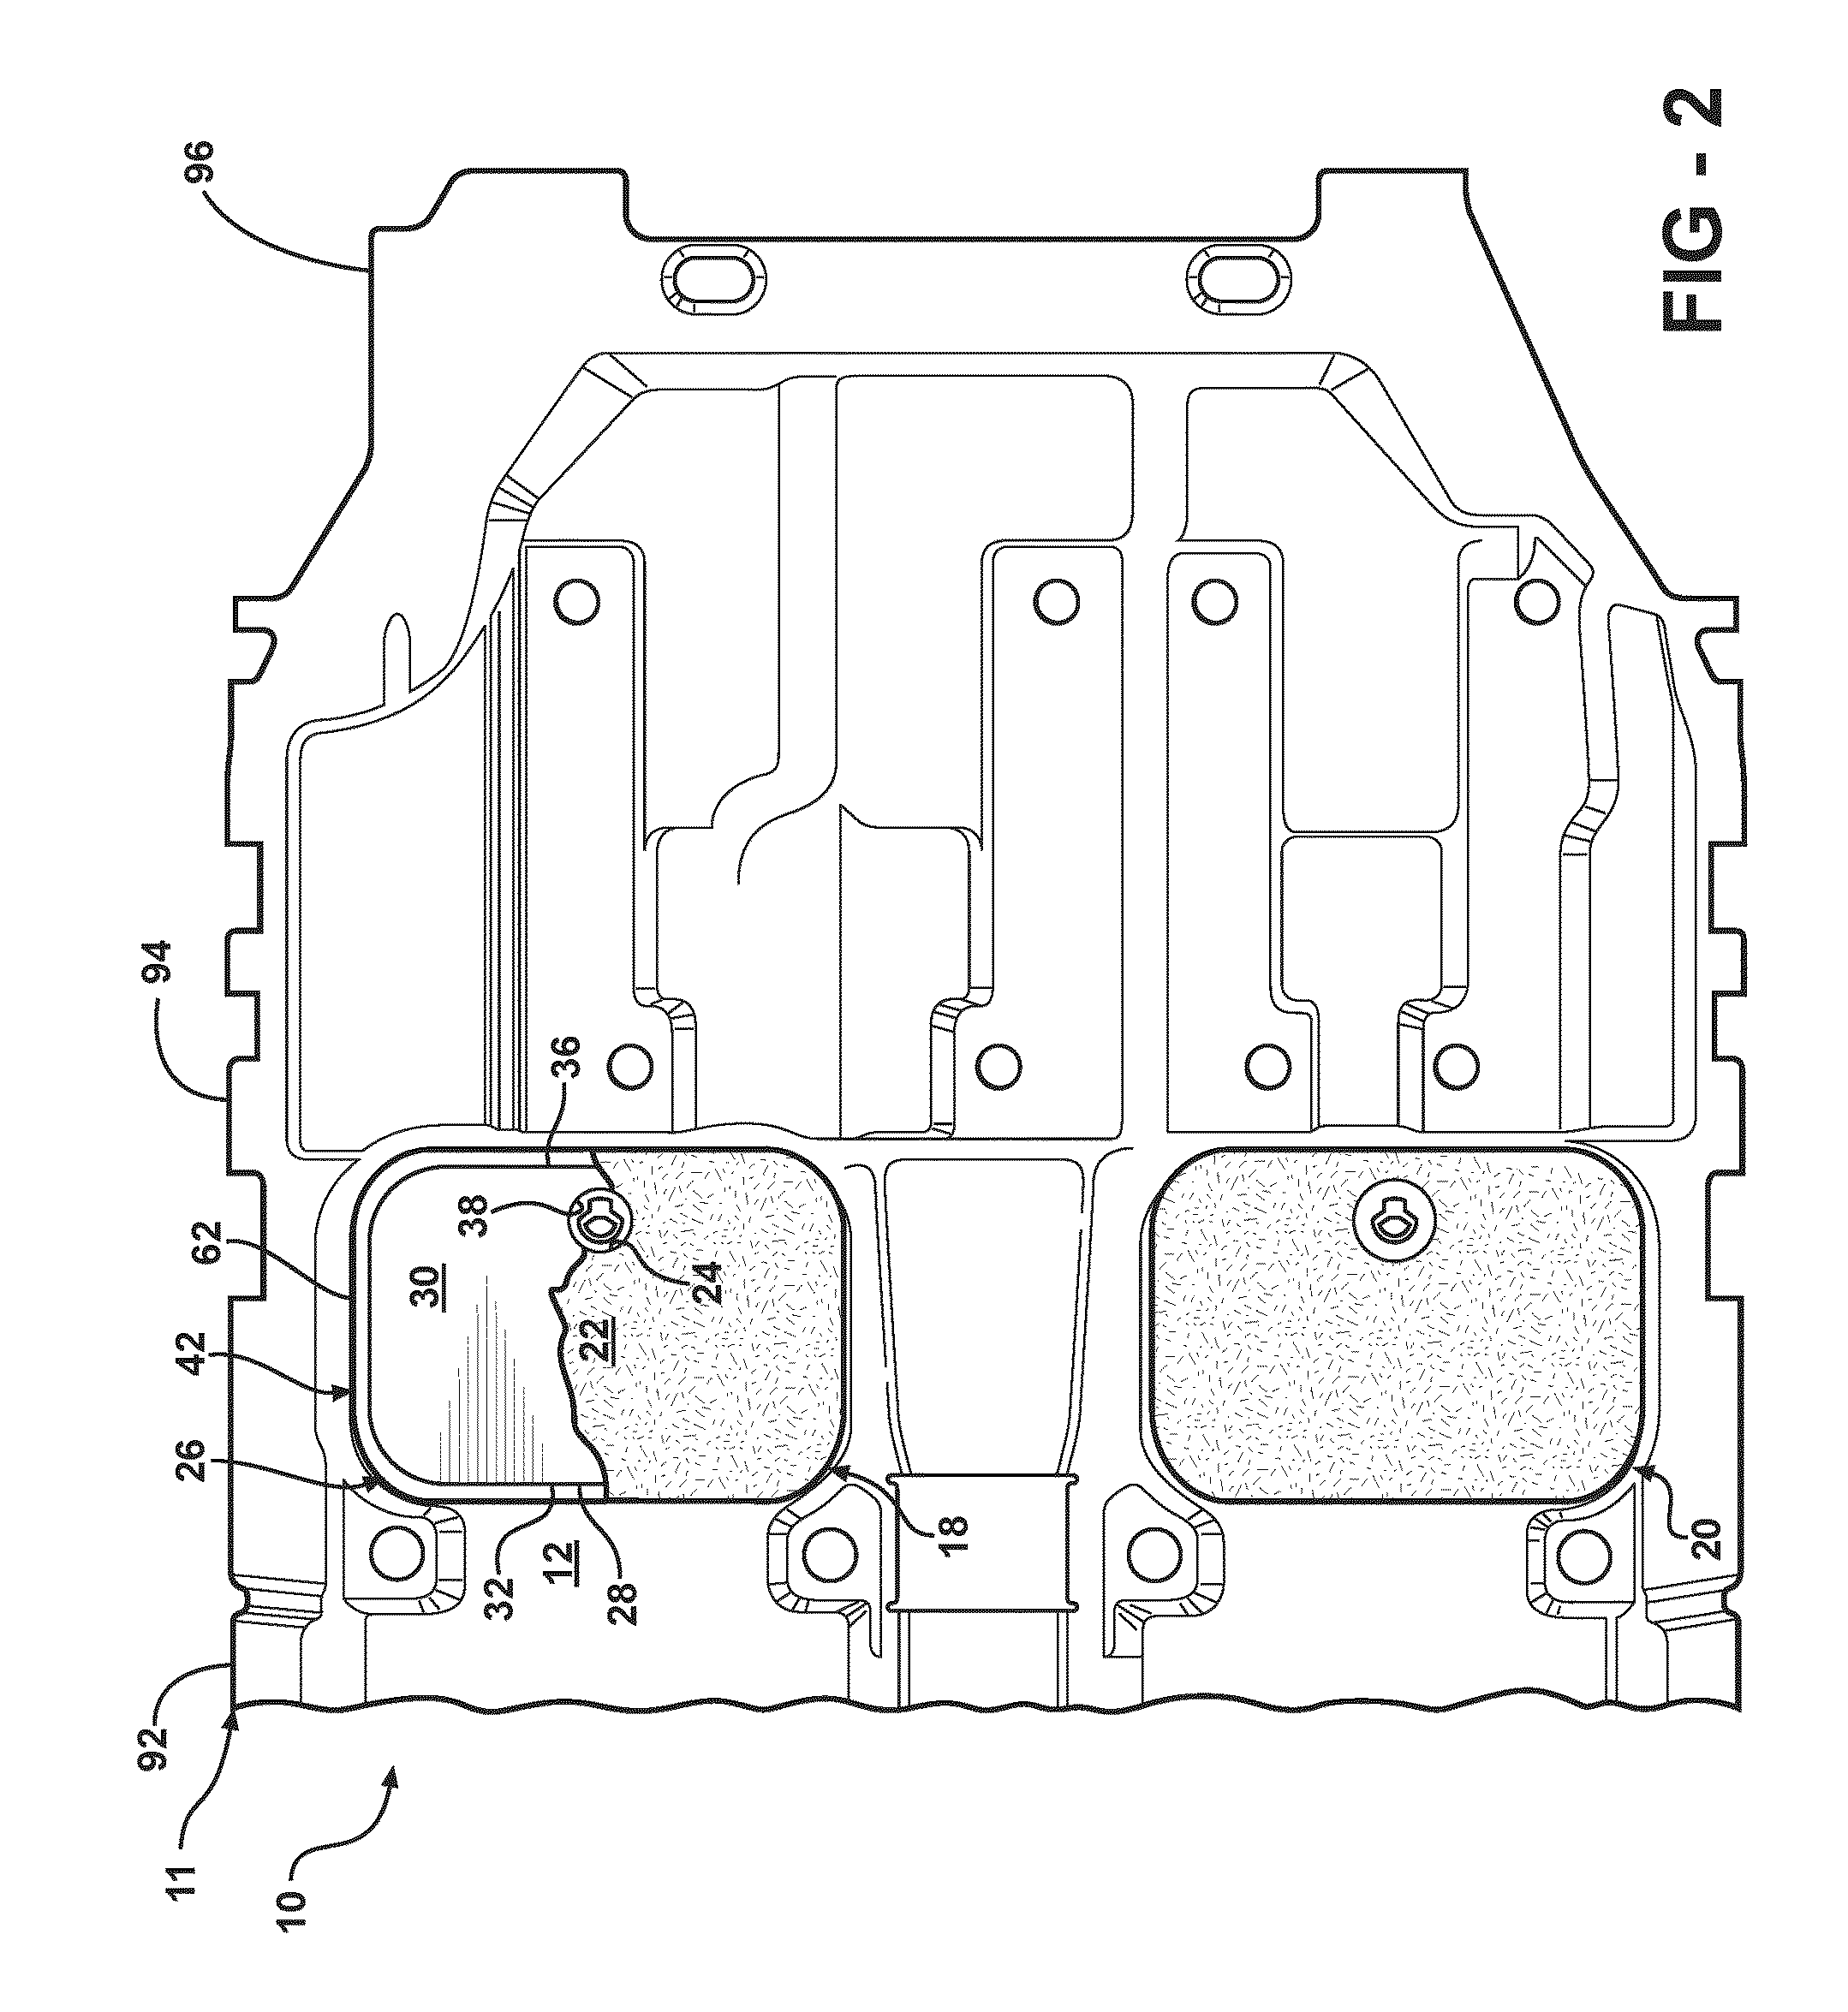 Removable in-floor storage device